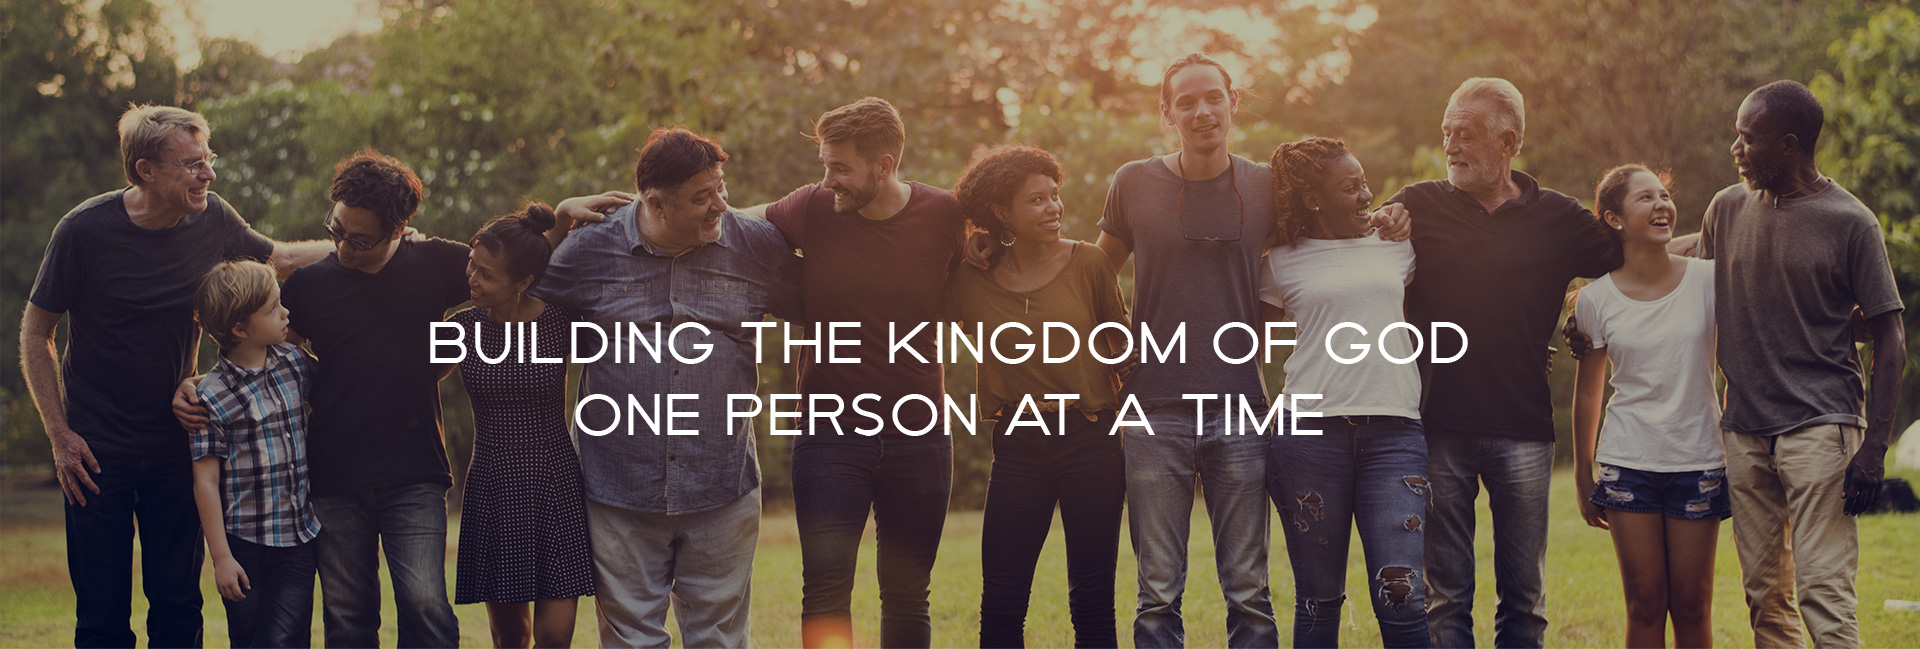 BUILDING THE KINGDOM OF GOD
ONE PERSON AT A TIME